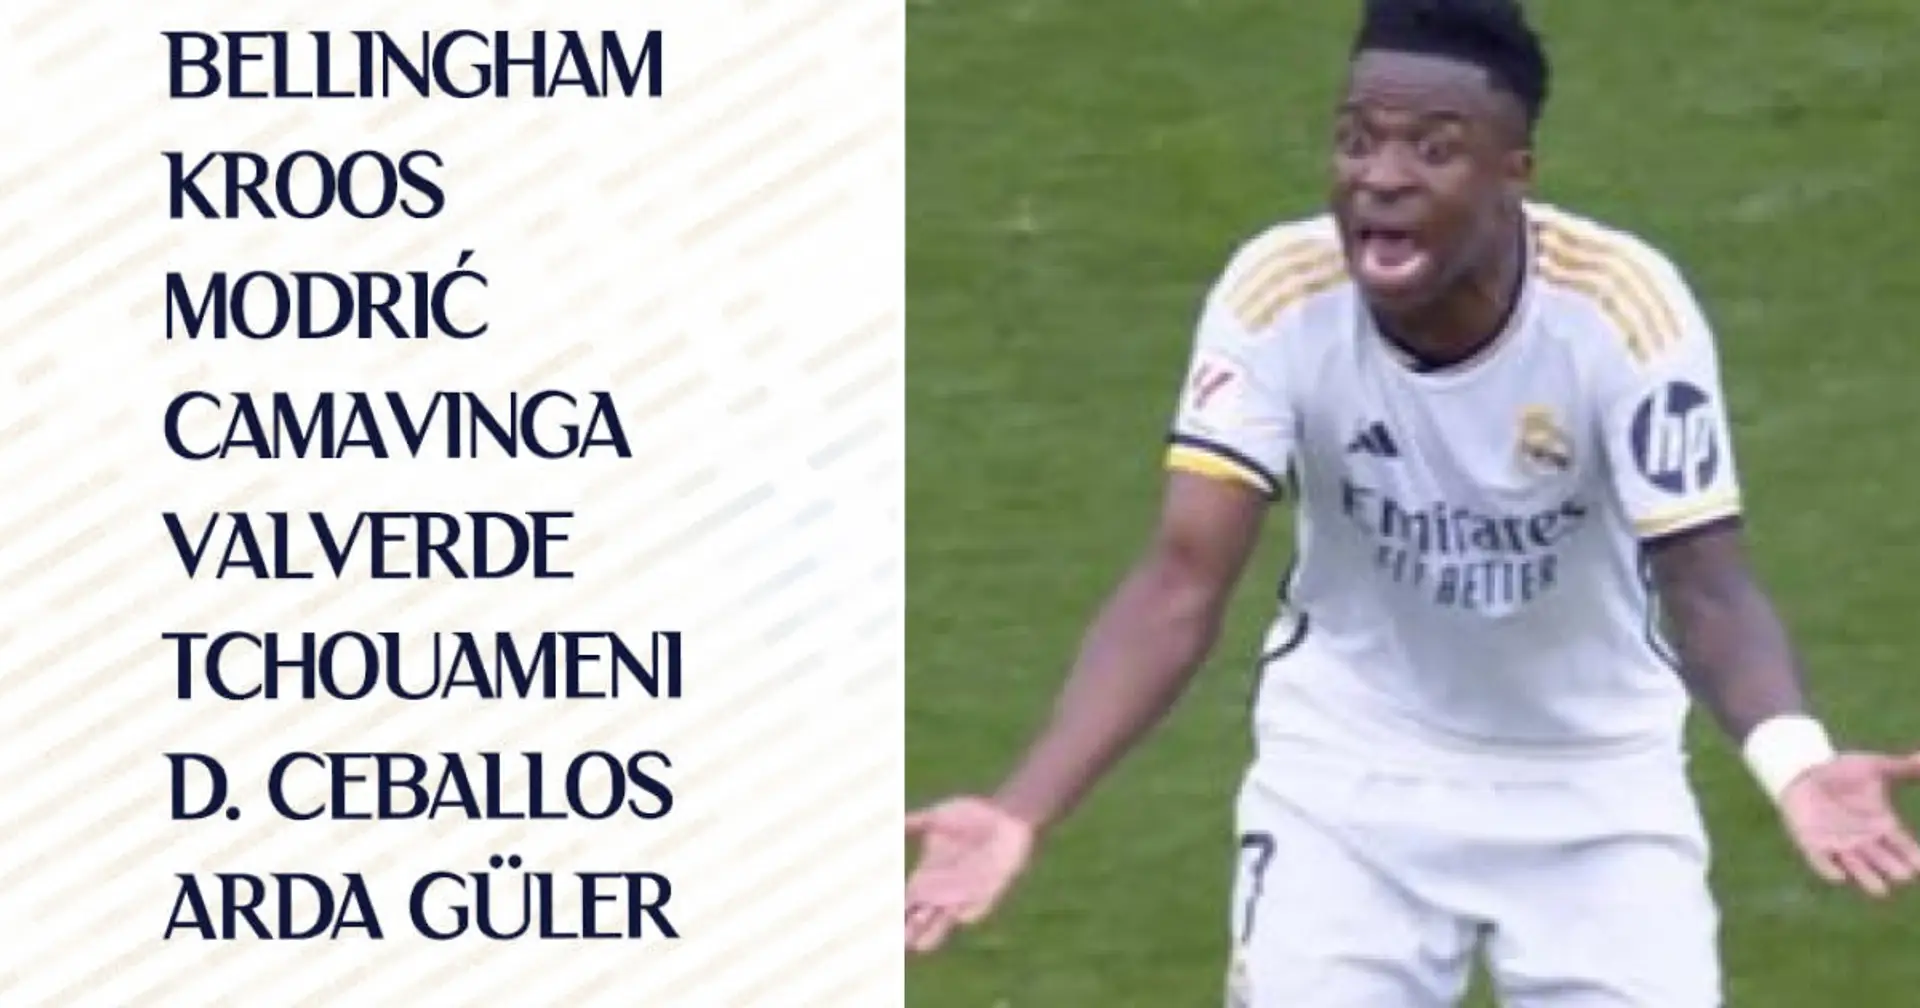 Vinicius out: Real Madrid unveil 21-man squad for Bilbao game